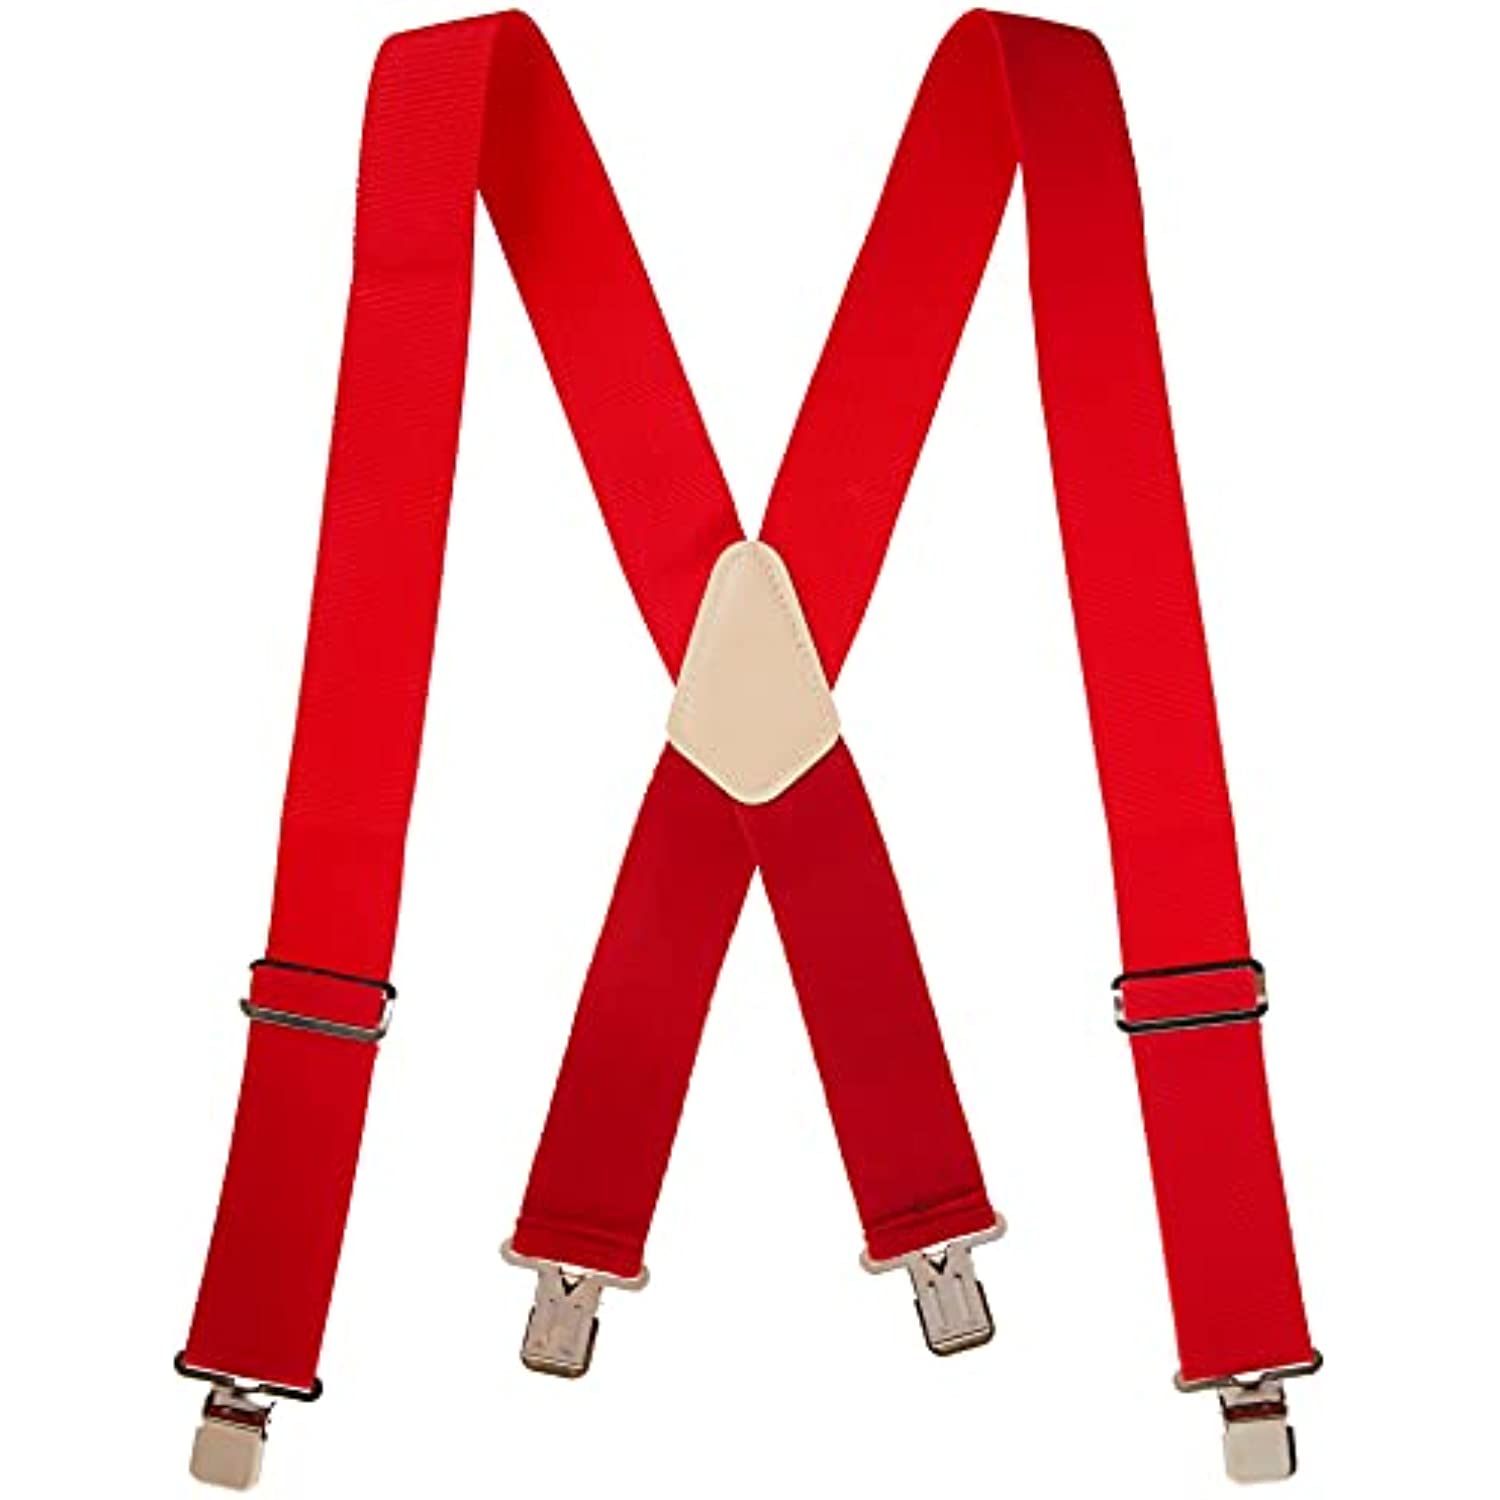 110RED 2 Wide Red Work Suspenders - image 2 of 5